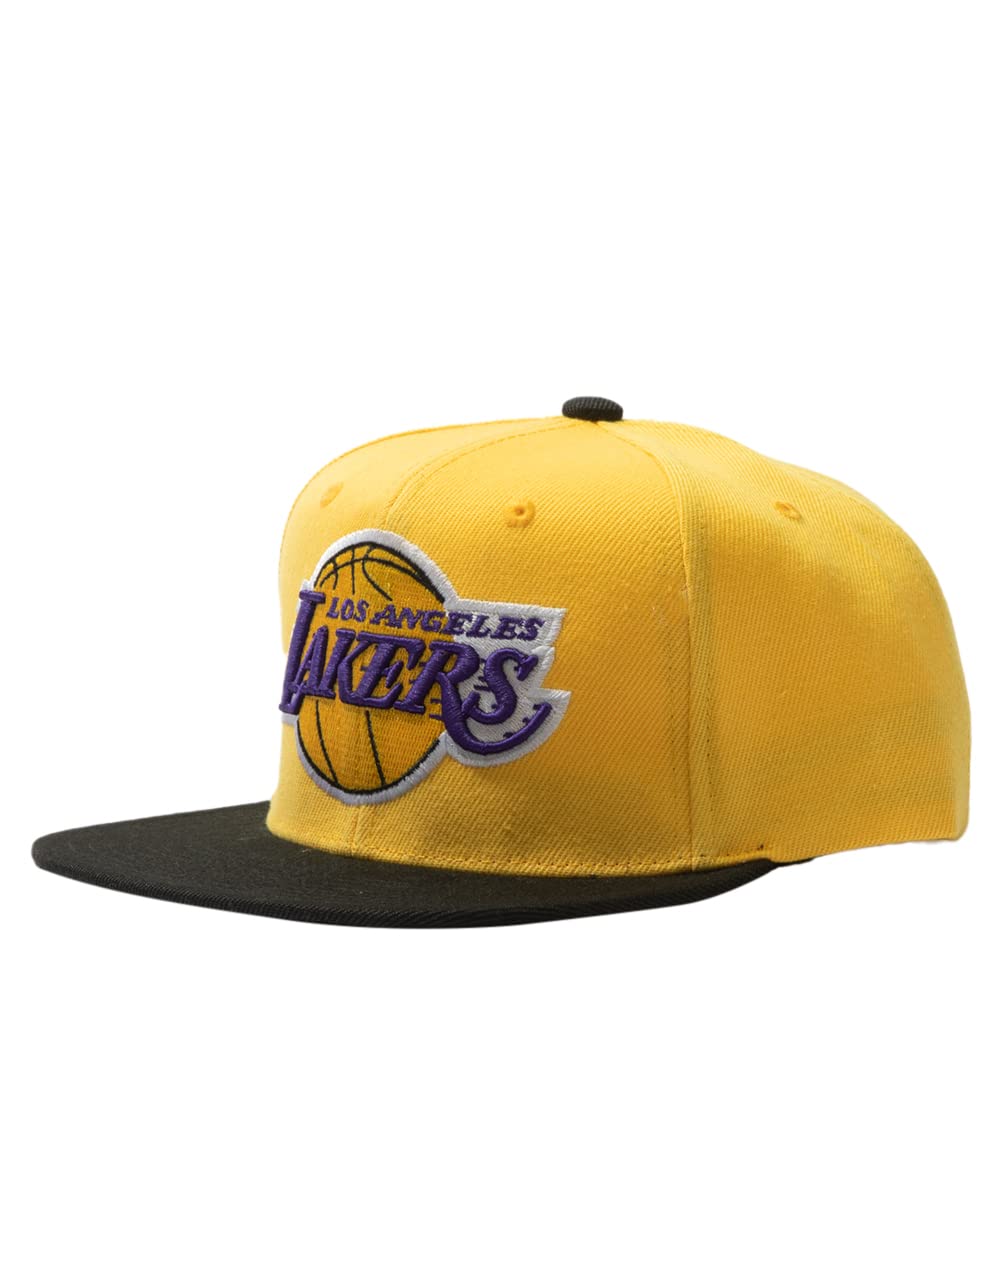 Mitchell & Ness Los Angeles Lakers Snapback Hat - Two-Tone Yellow/Black - LA Lakers Cap - Caps Fitted Caps Fitted One Size / Yellow Caps